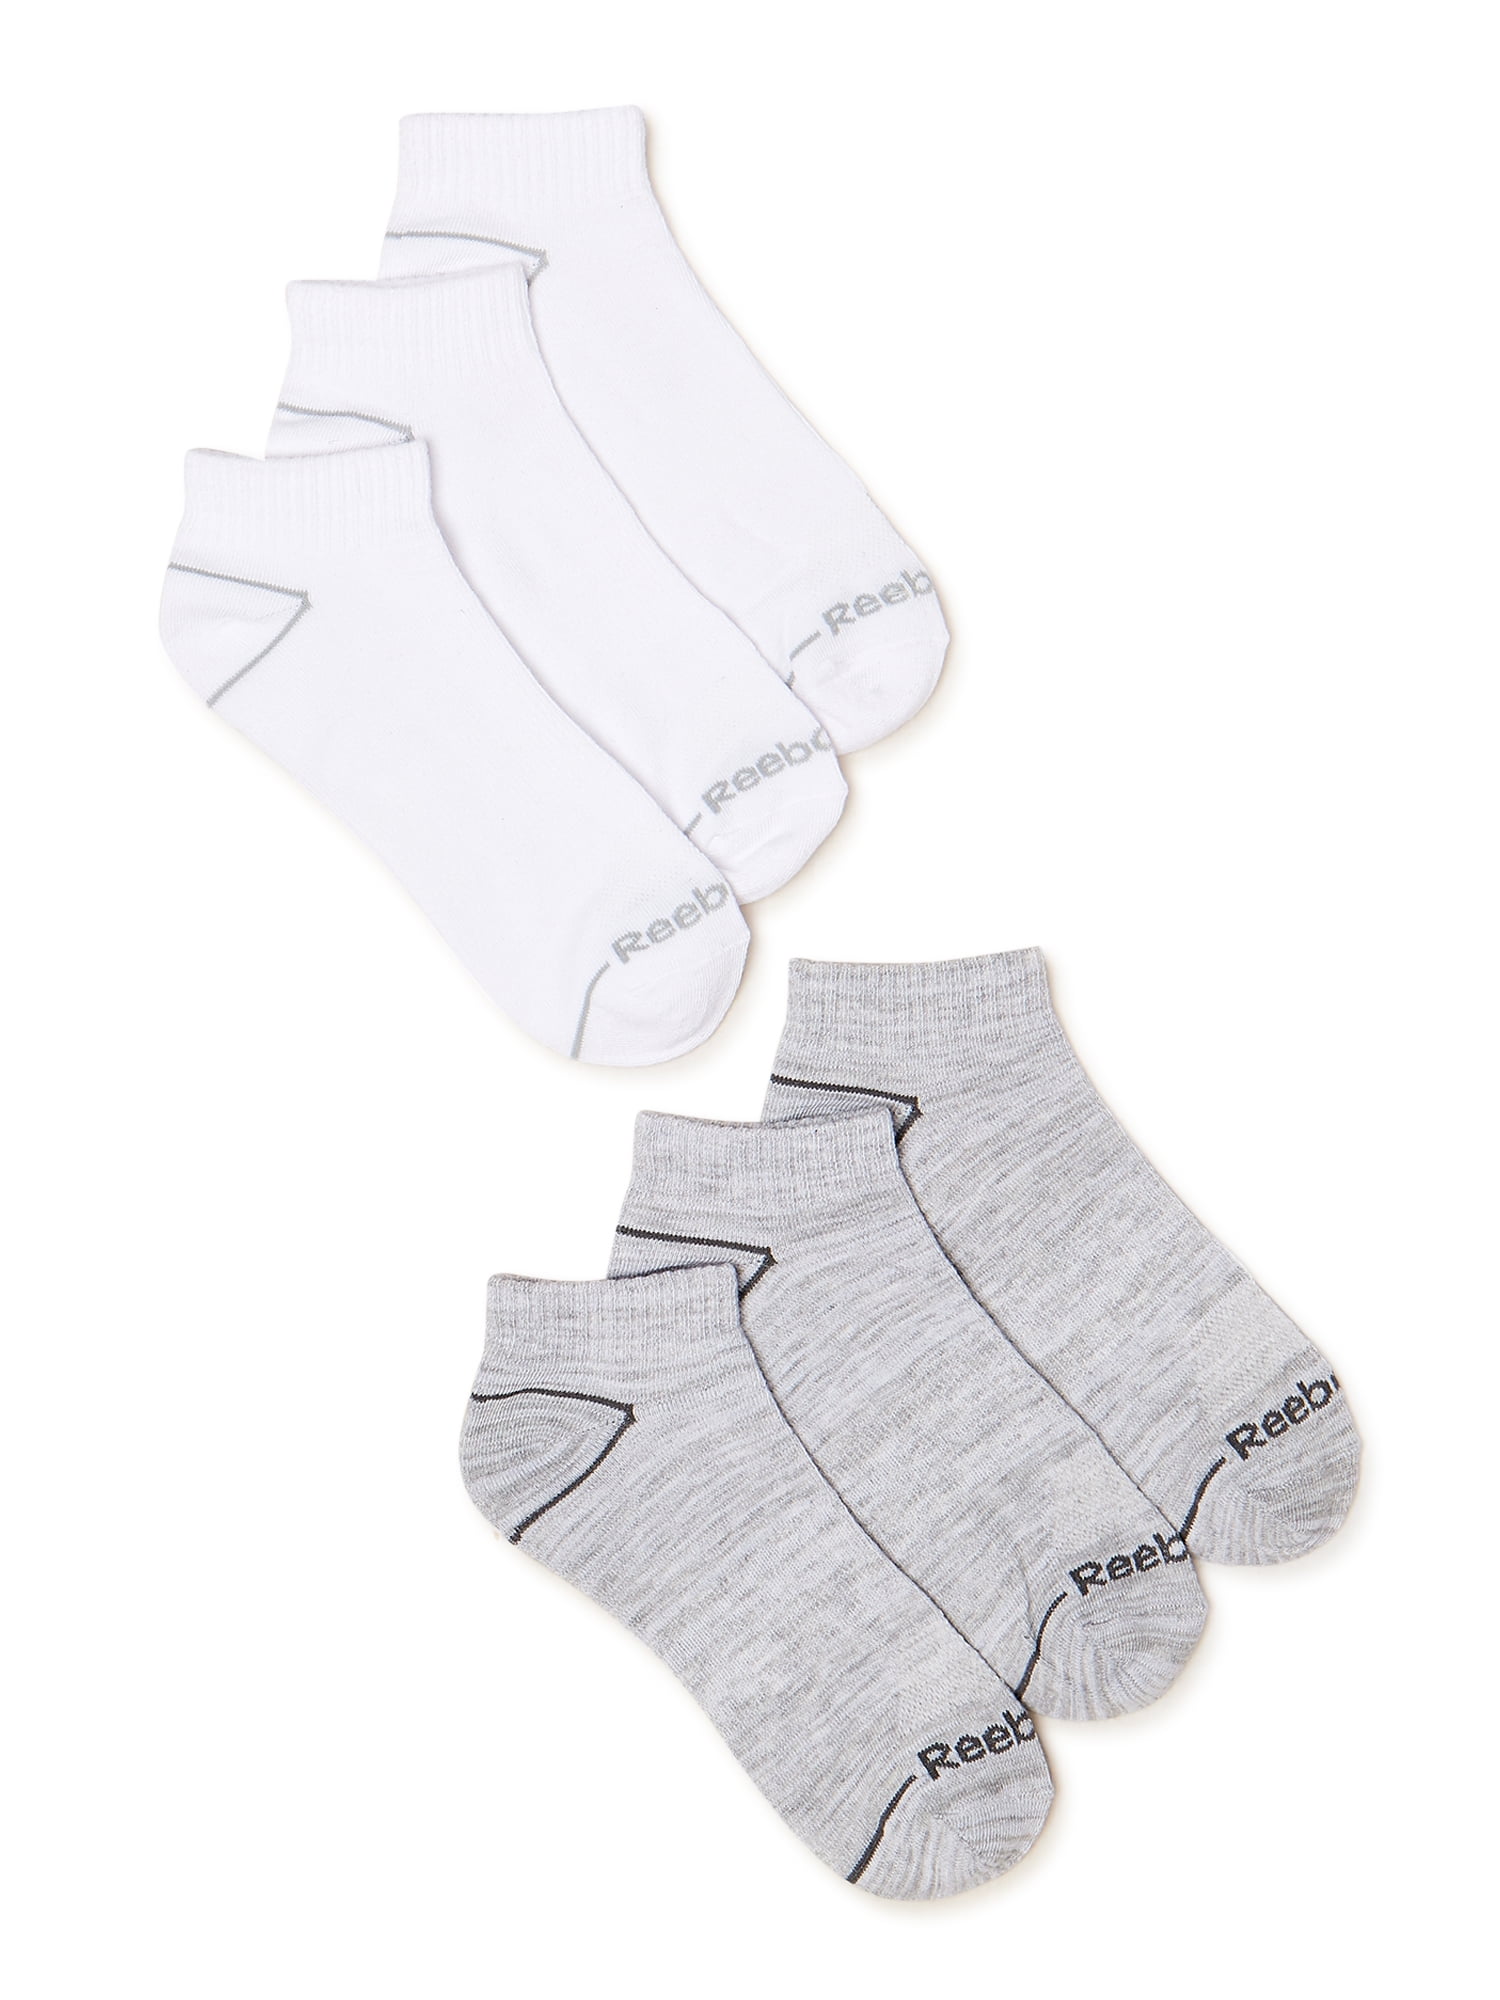 The Childrens Place Boys Big 4876 Crew Socks Pack of 3 